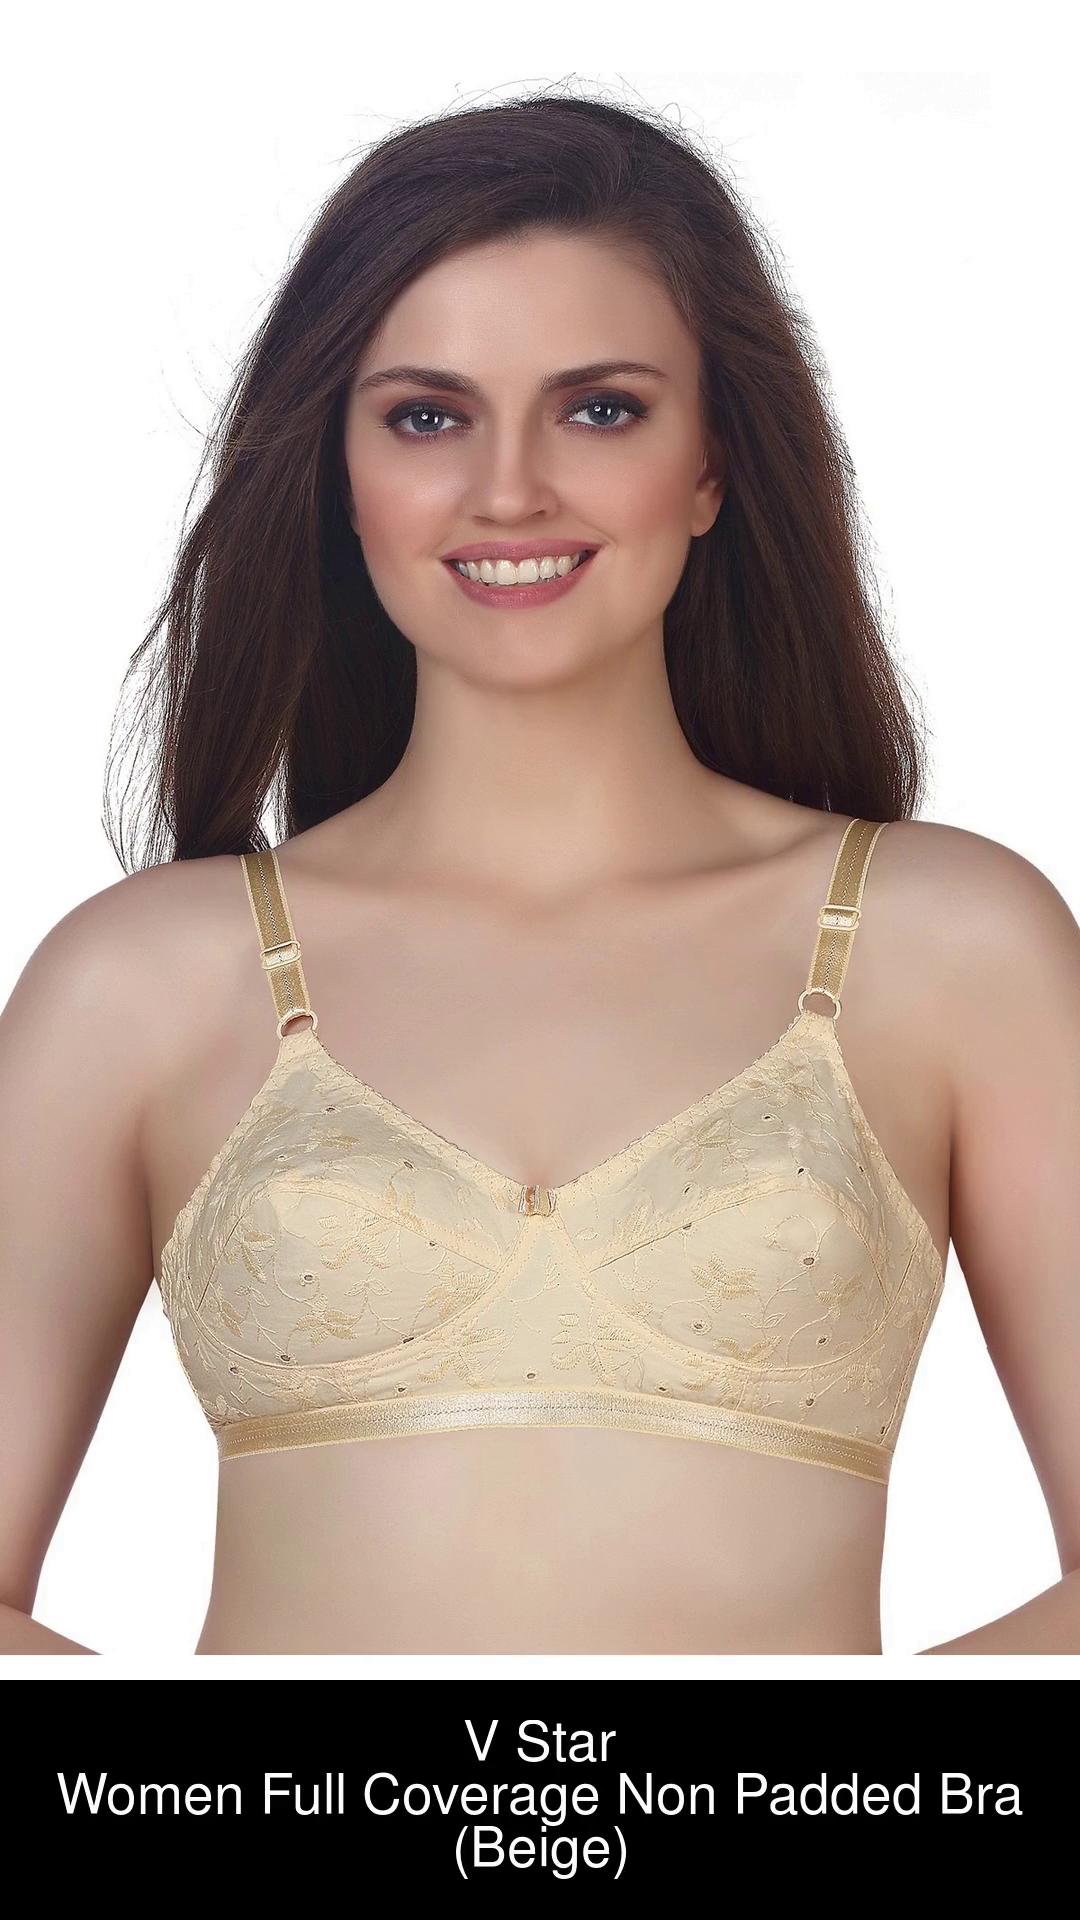 V Star IMAGE Women Full Coverage Non Padded Bra - Buy V Star IMAGE Women  Full Coverage Non Padded Bra Online at Best Prices in India